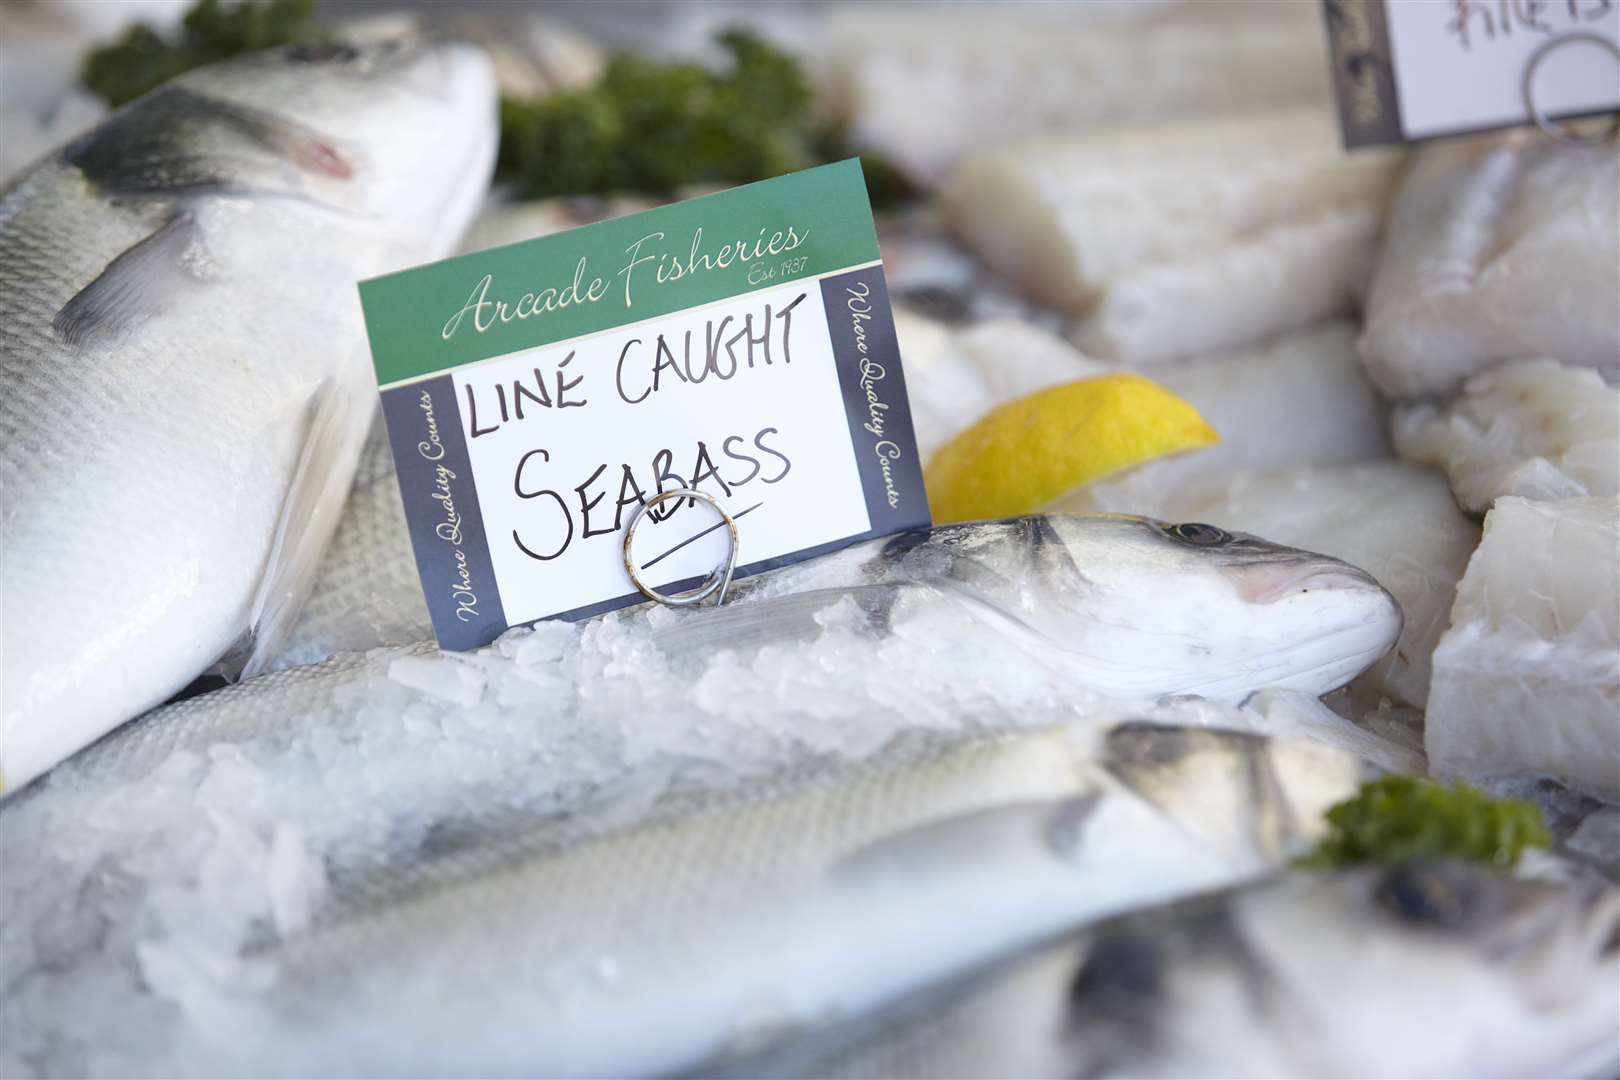 Fresh fish is on offer at an ever increasing number of Kent markets